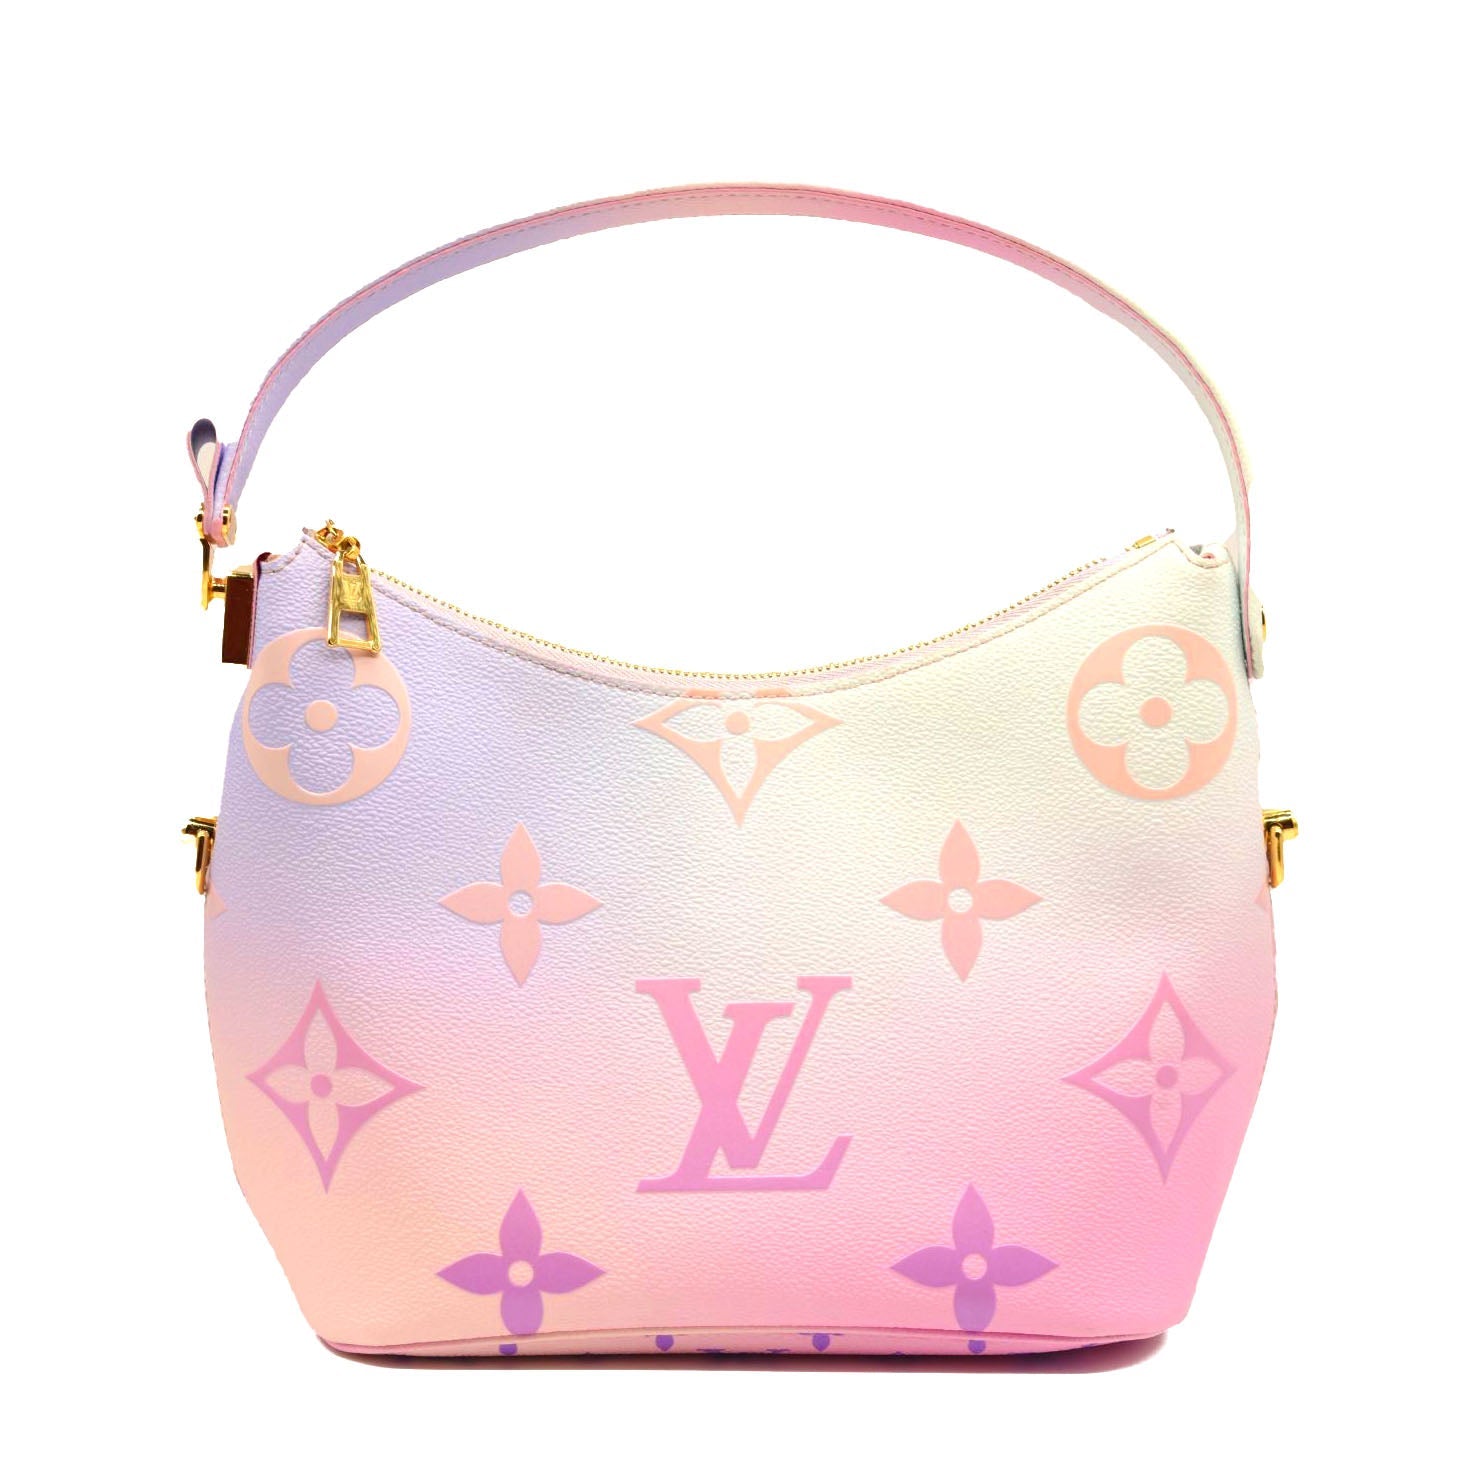 Louis Vuitton Marshmallow Cream Ombre By The Pool Hobo Bag, Sold